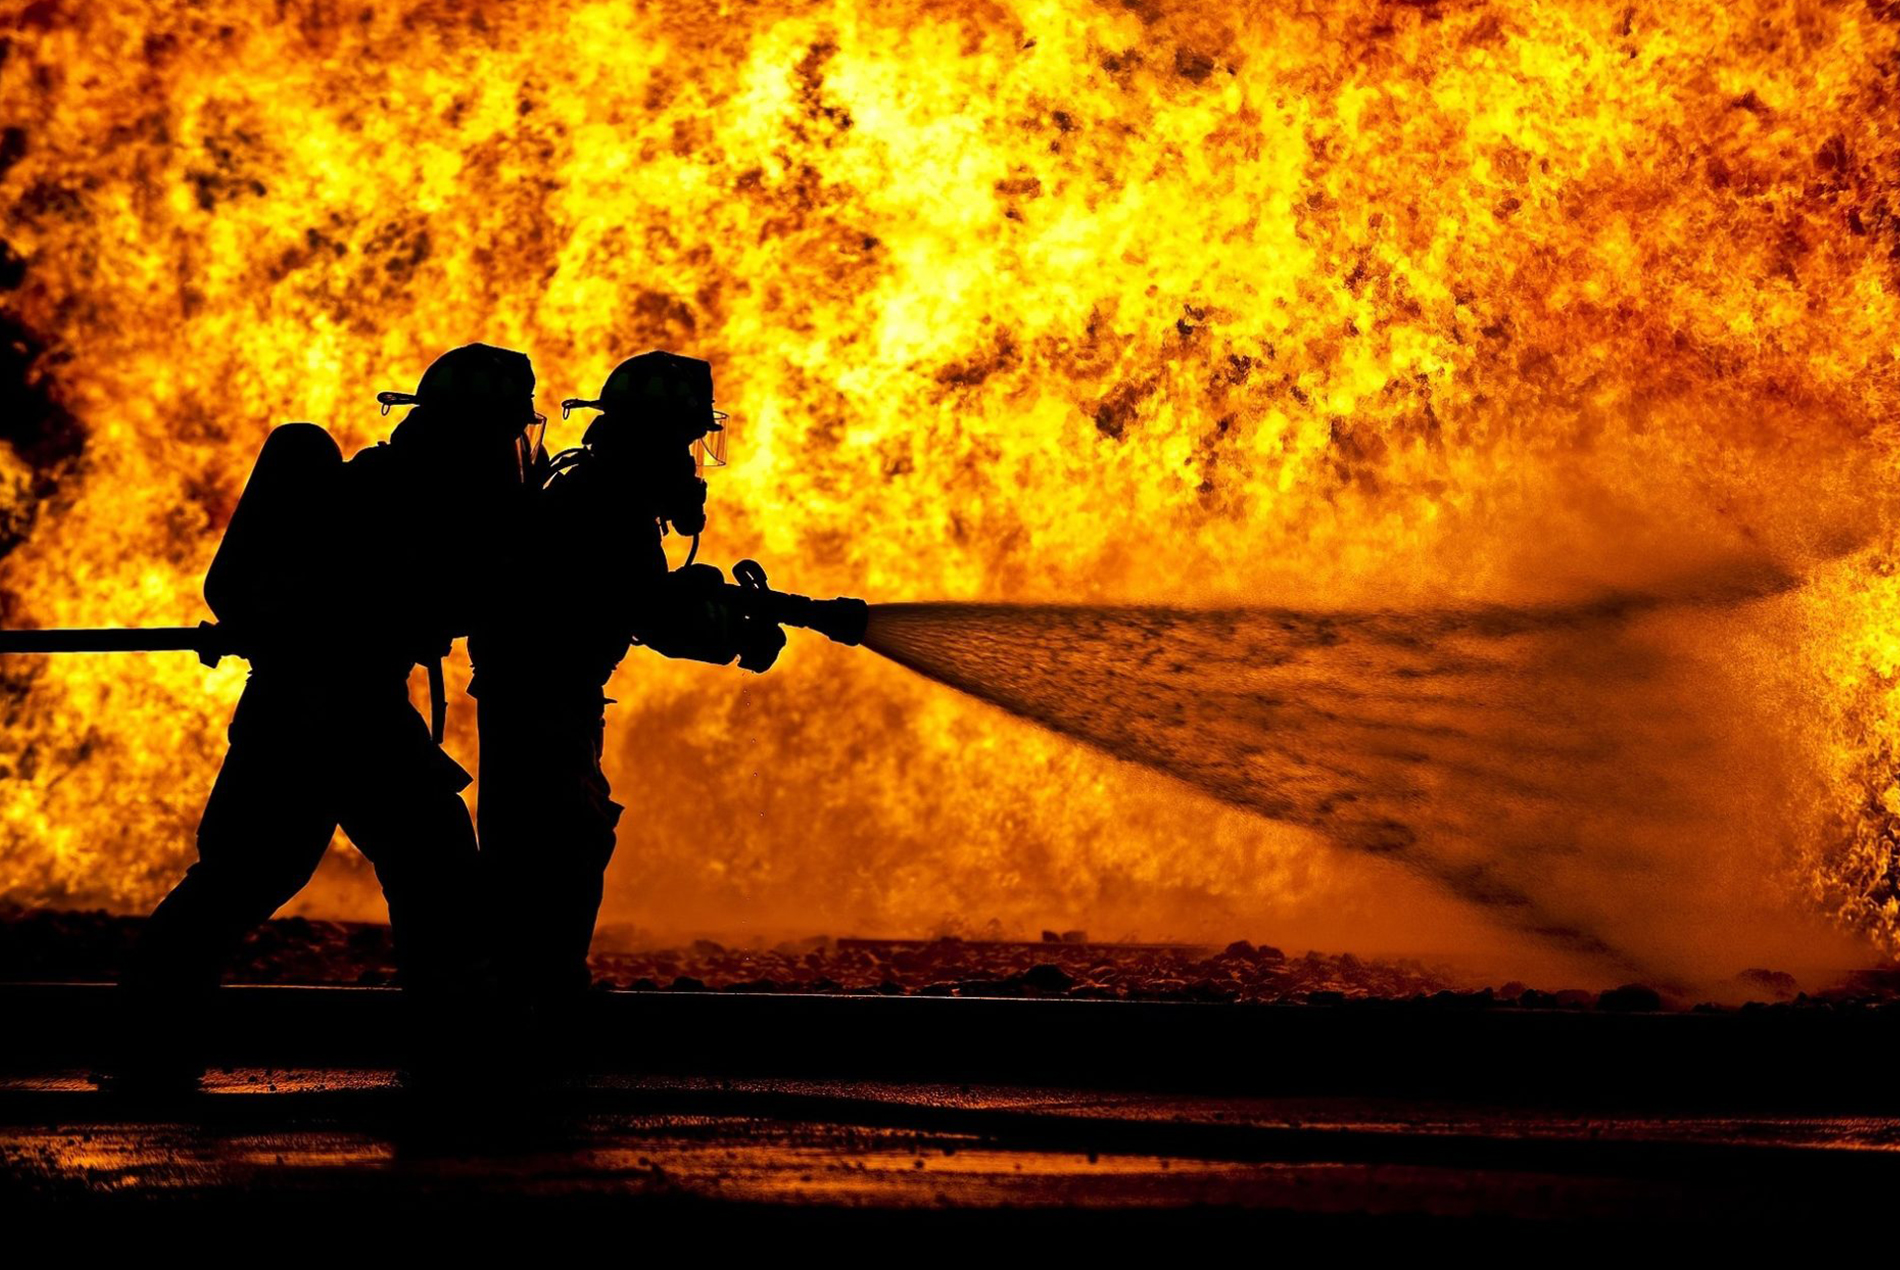 Why would Congress add more dangers to firefighting?